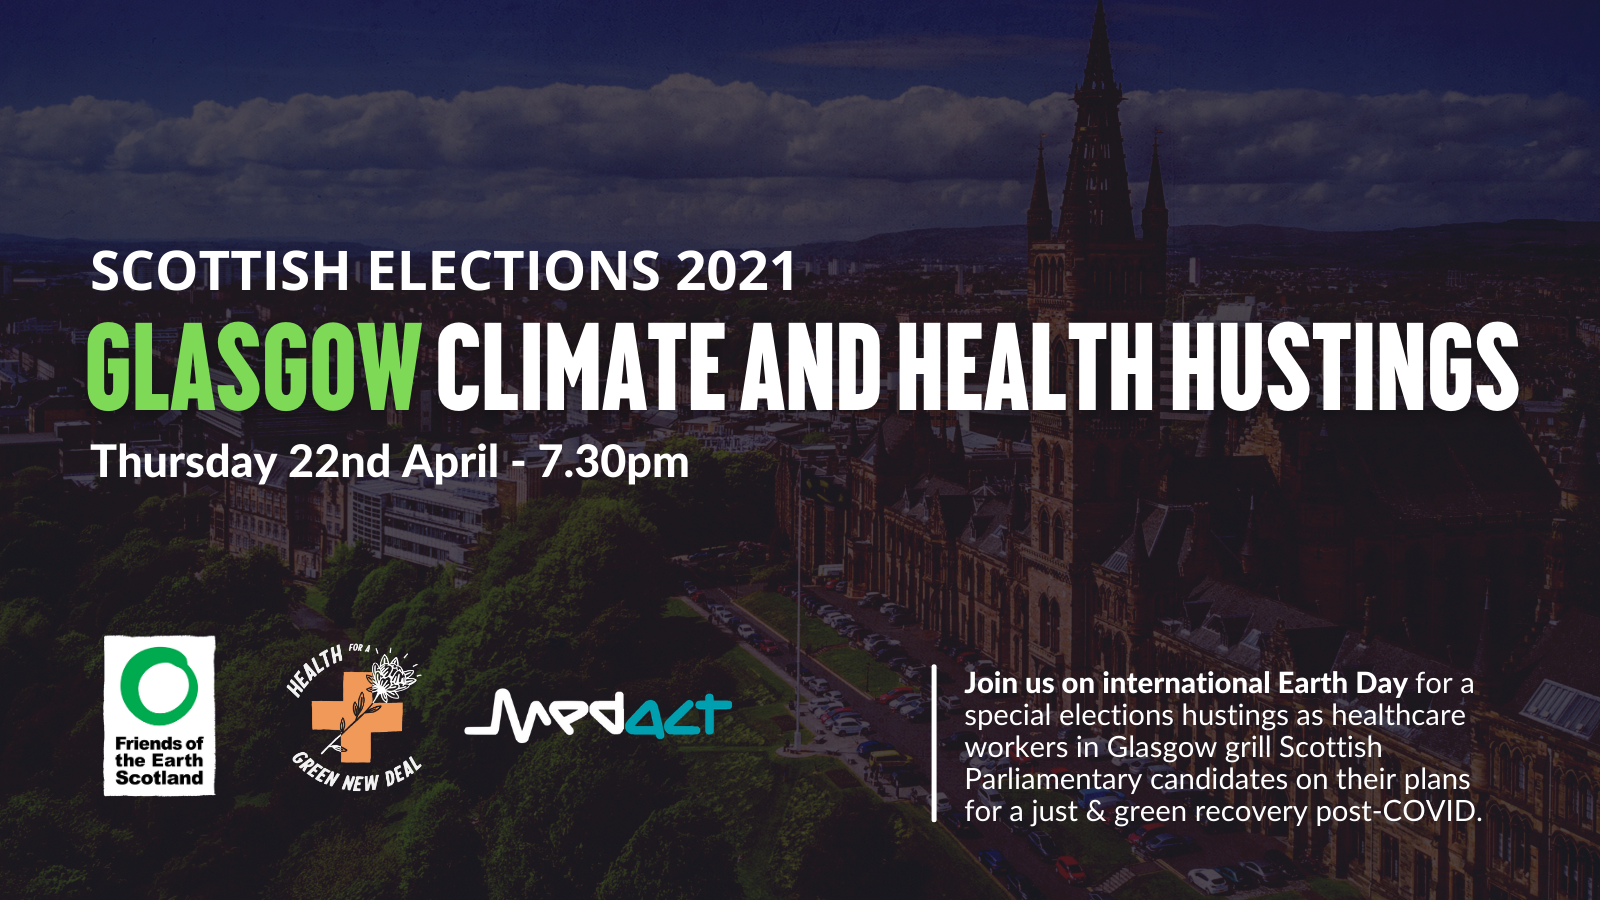 Scottish Elections 2021: Glasgow Climate and Health Hustings